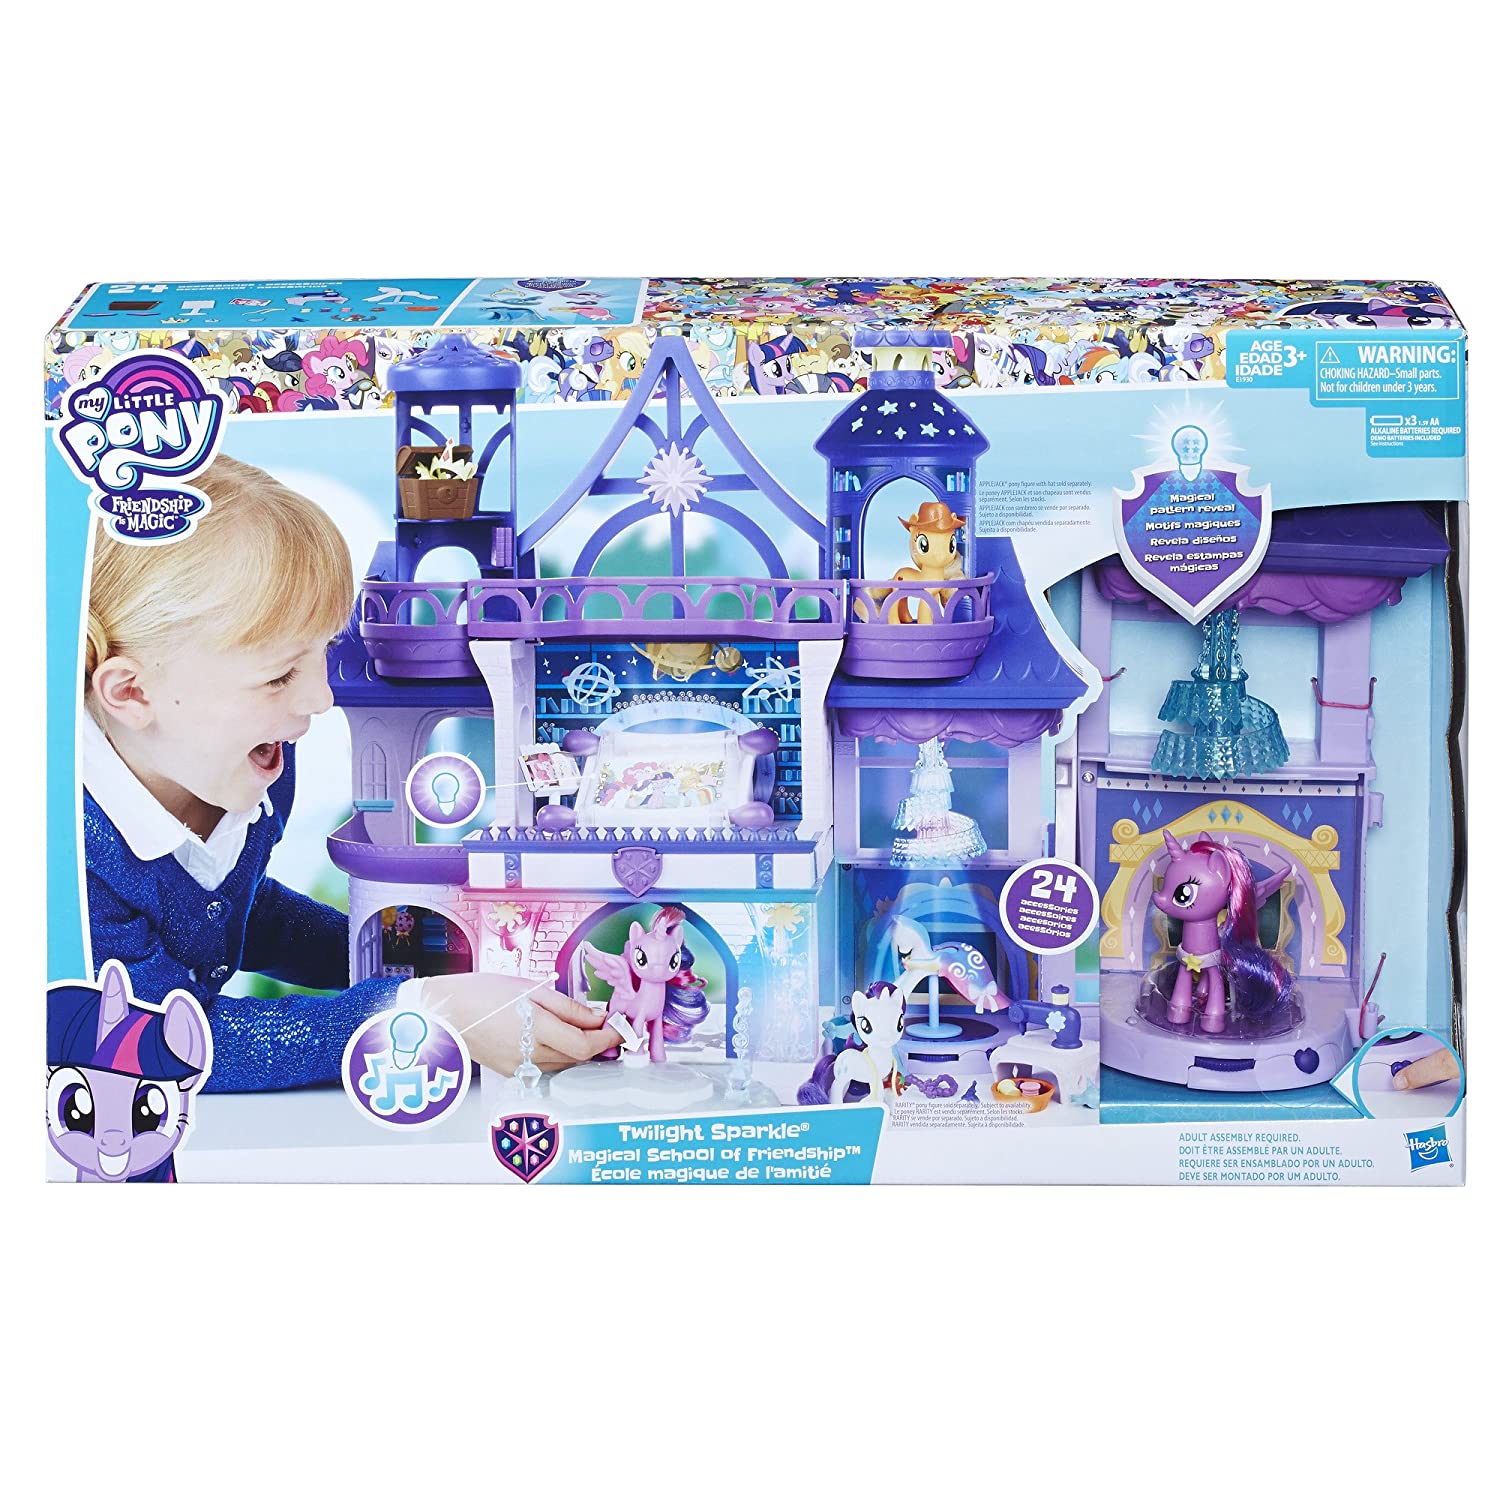 Top 11 Best My Little Pony Toys Reviews in 2022 7